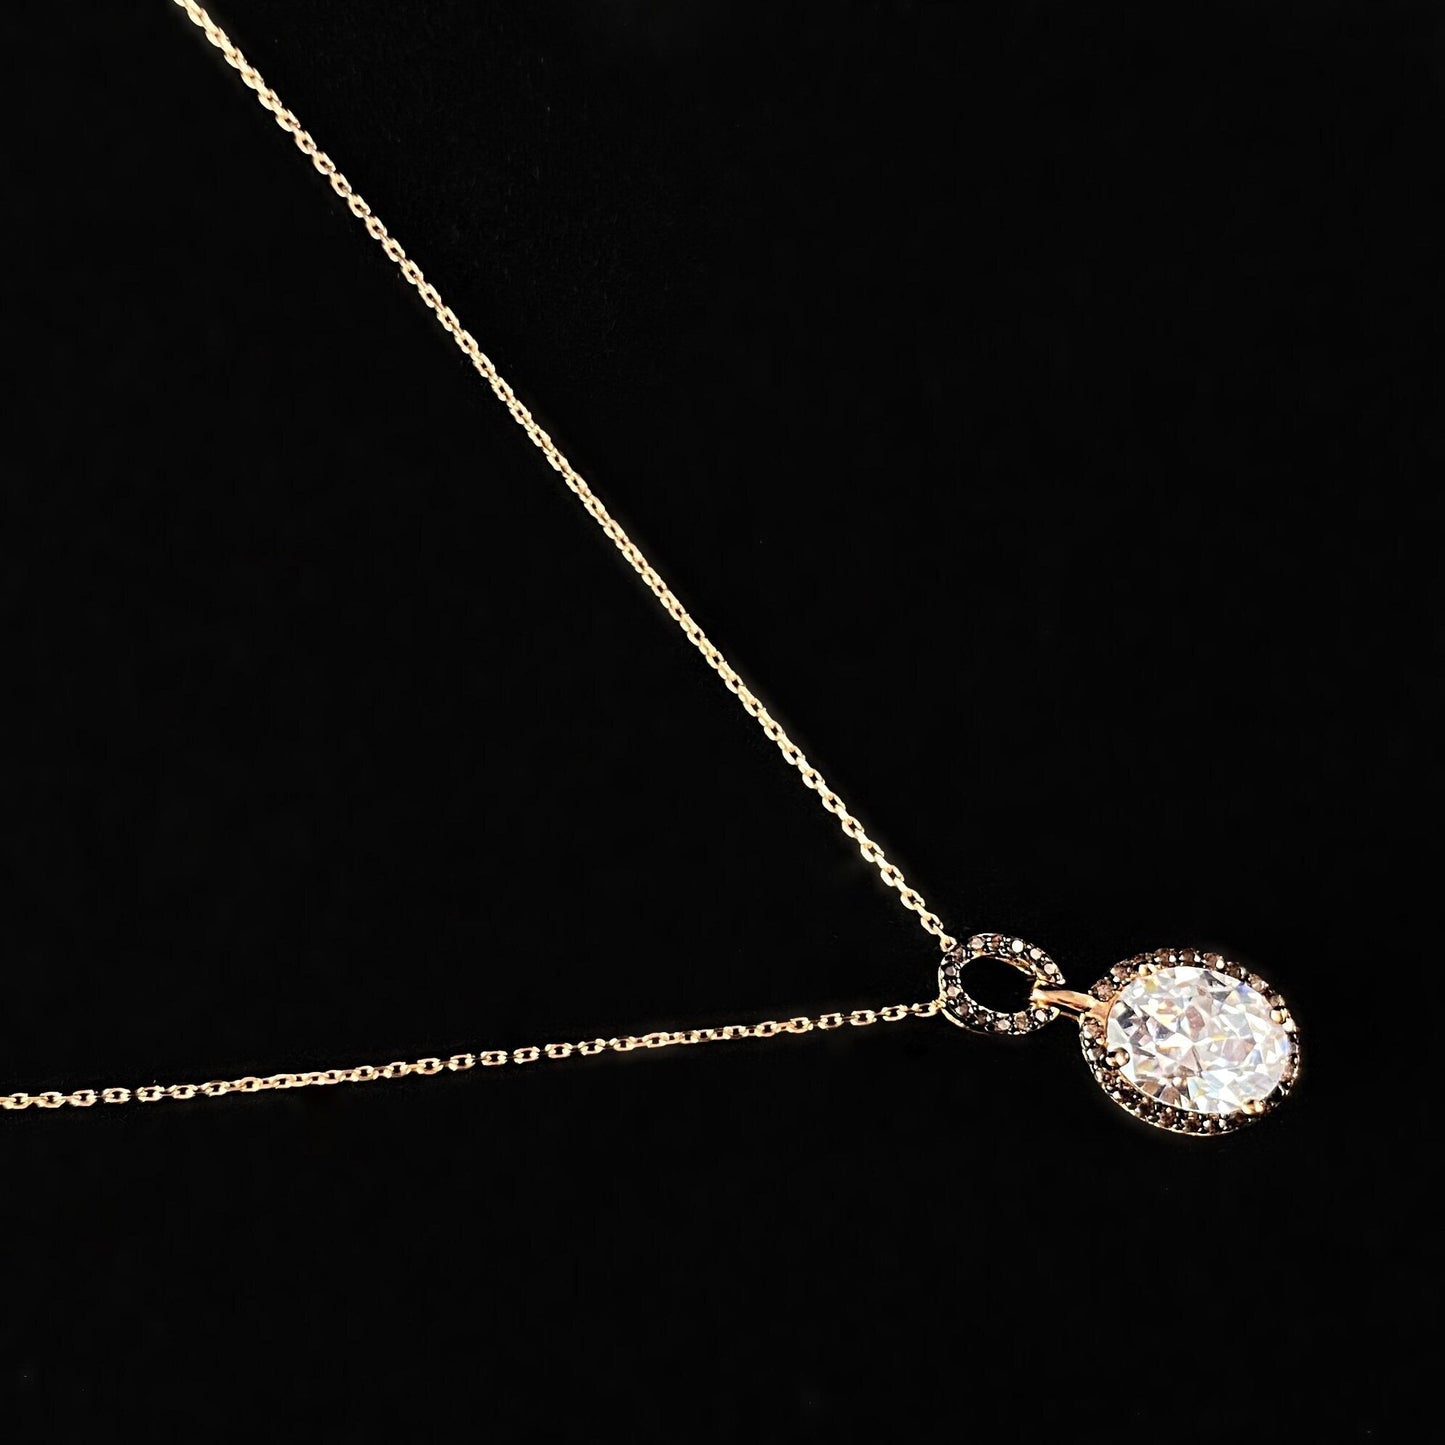 Elegant Dainty Rose Gold Necklace with Round Clear and Black Crystals Pendant- Genevive